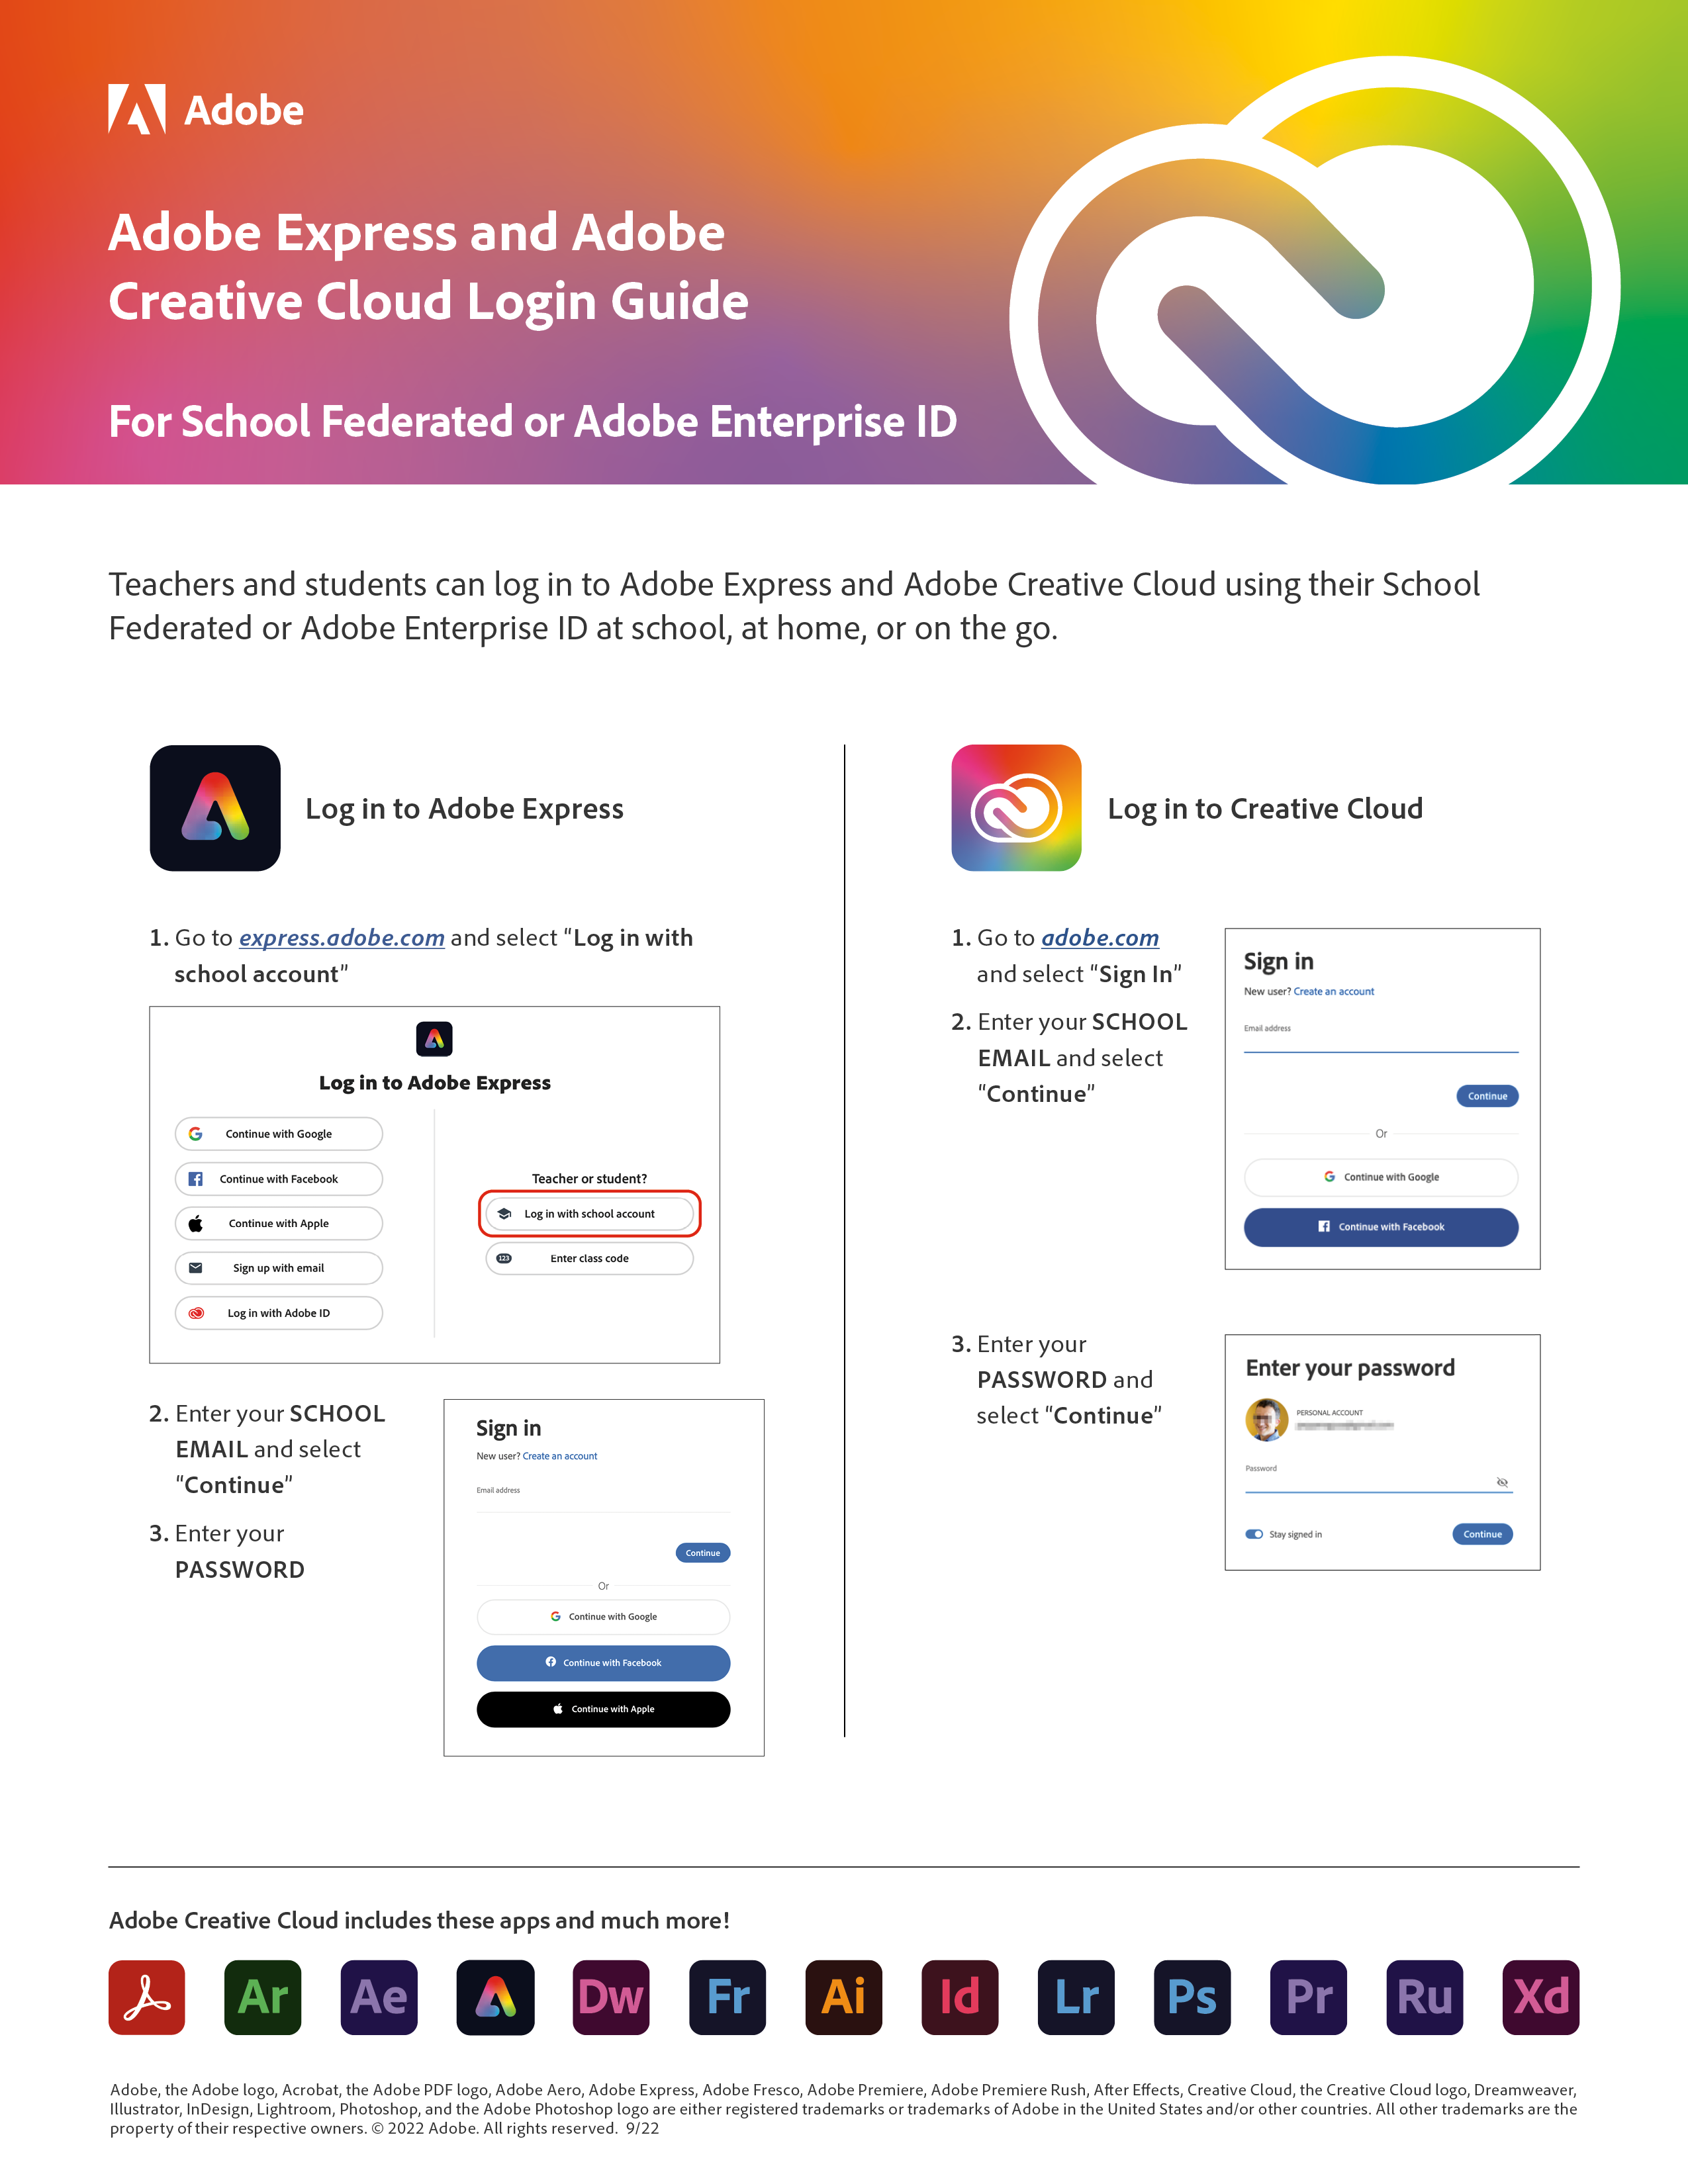 Log in to Adobe Express and Adobe Creative Cloud with Federated/Enterprise ID